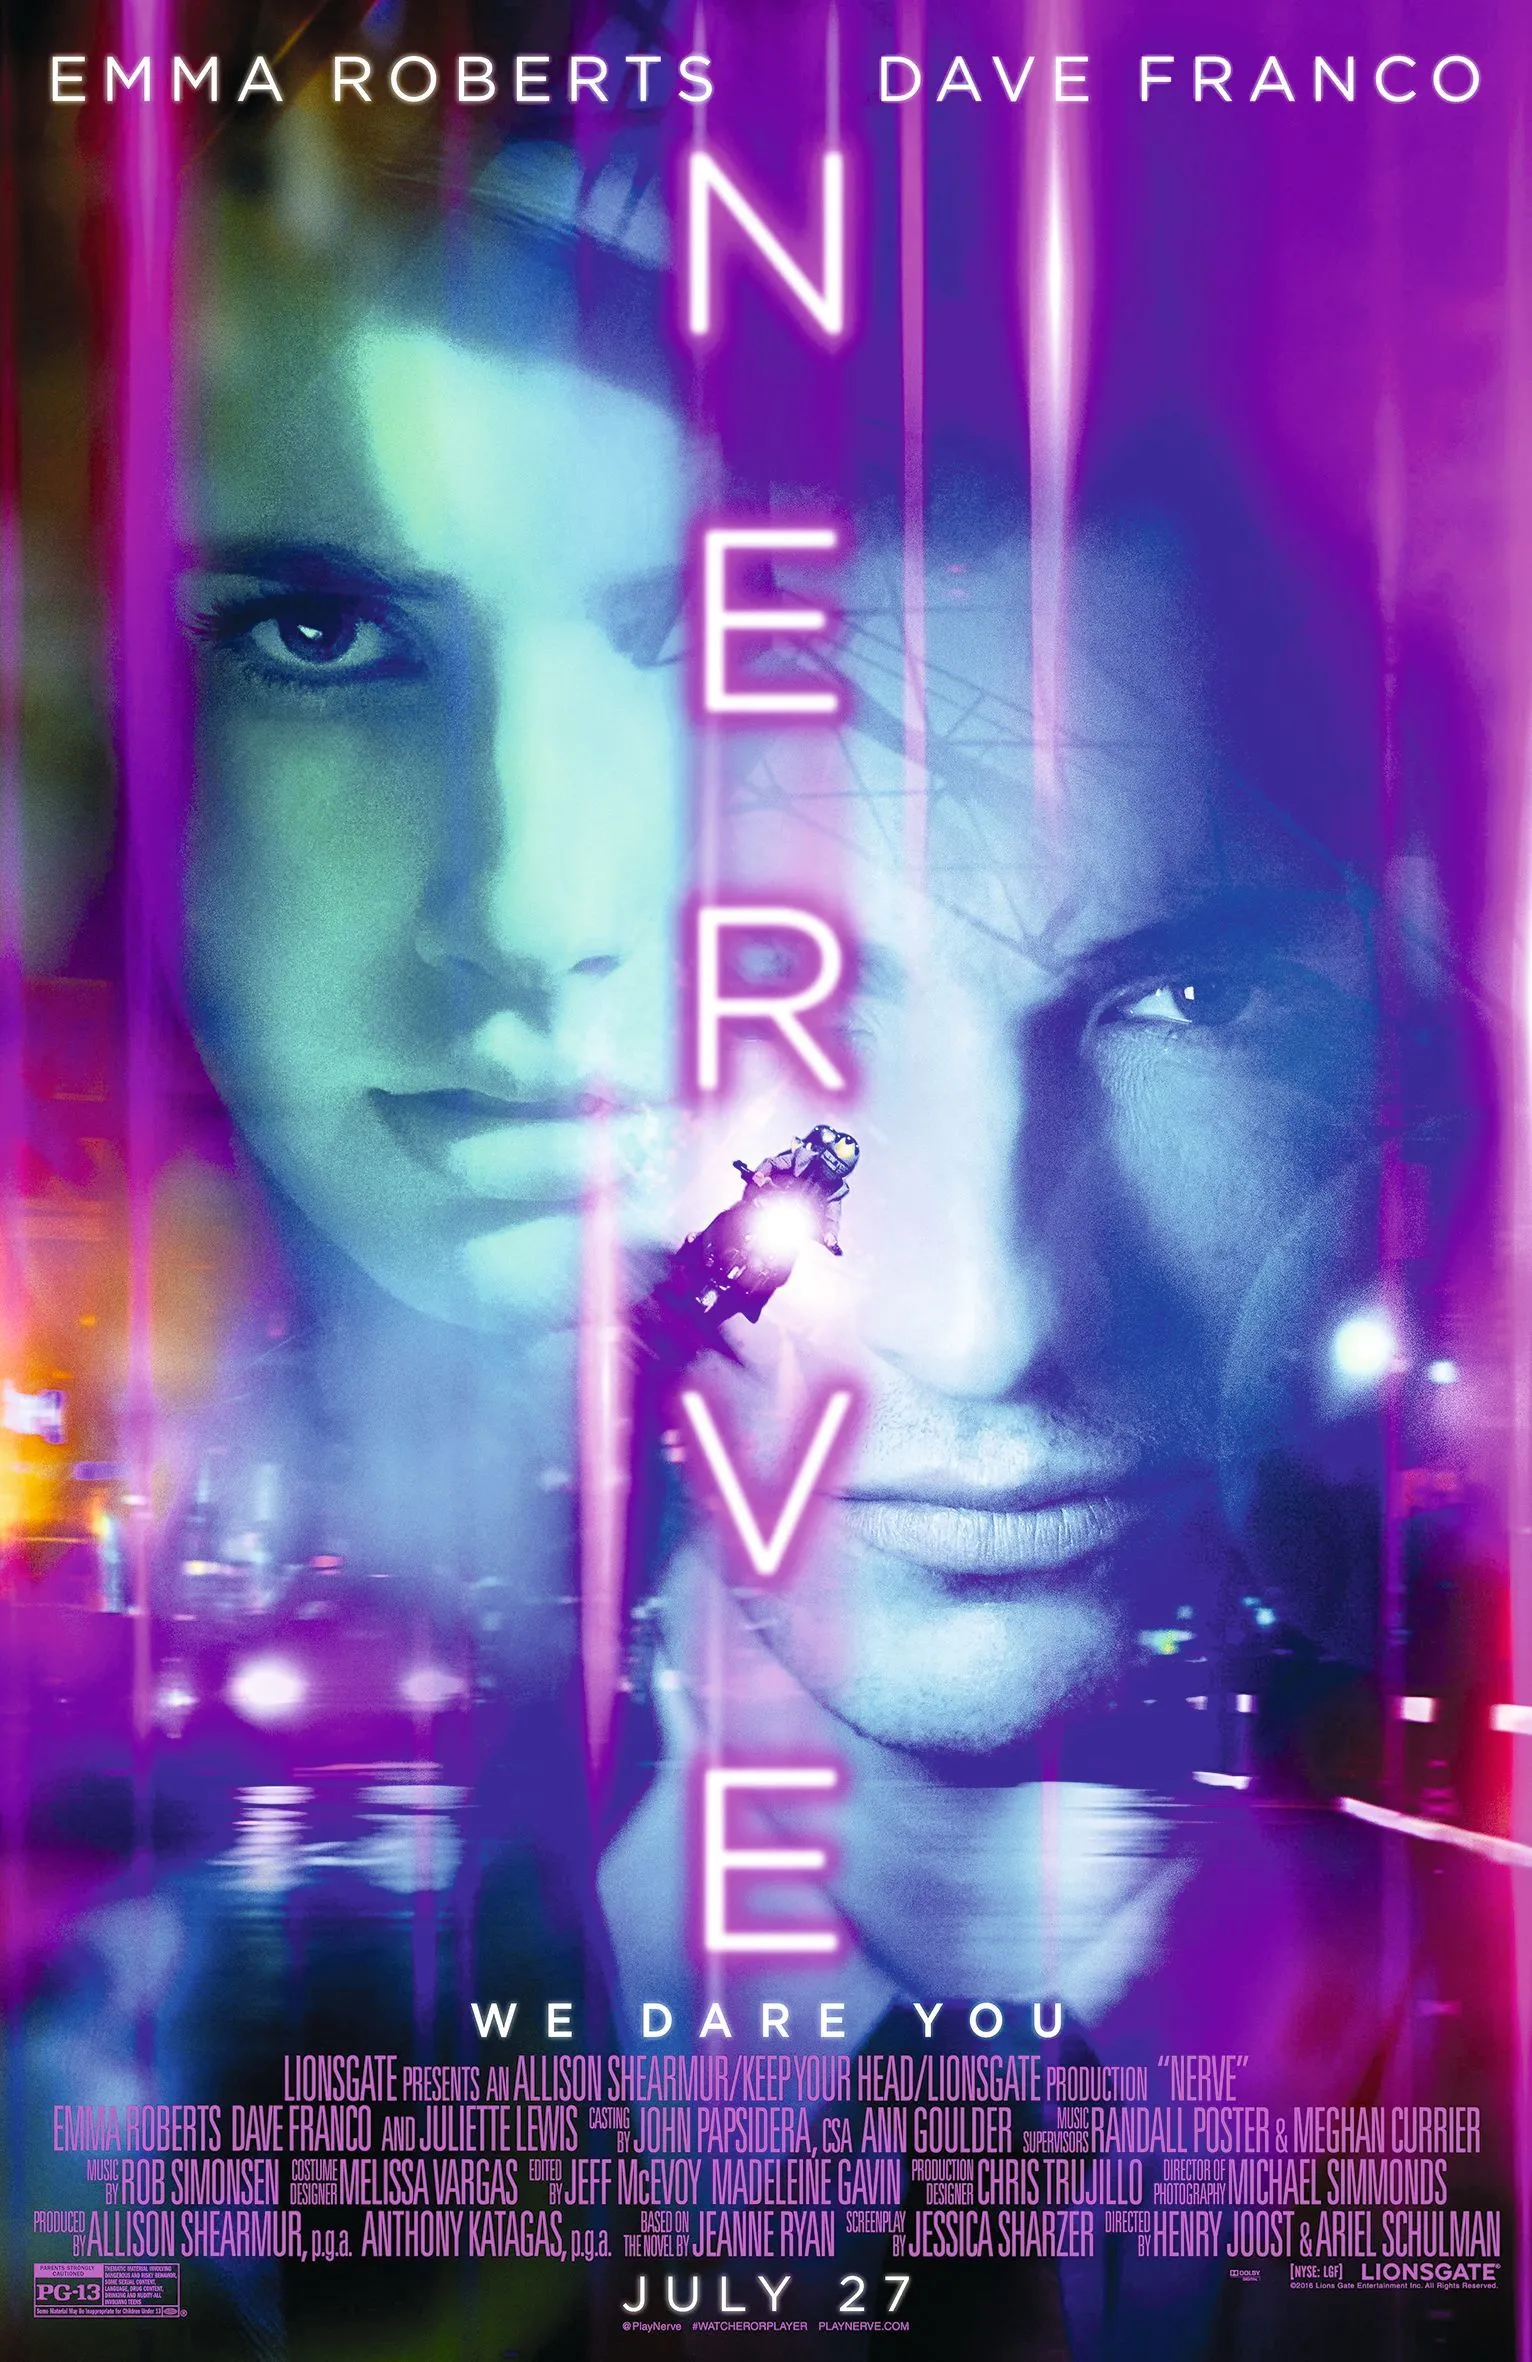 Poster of Nerve, by Ariel Schulman and Henry Joost